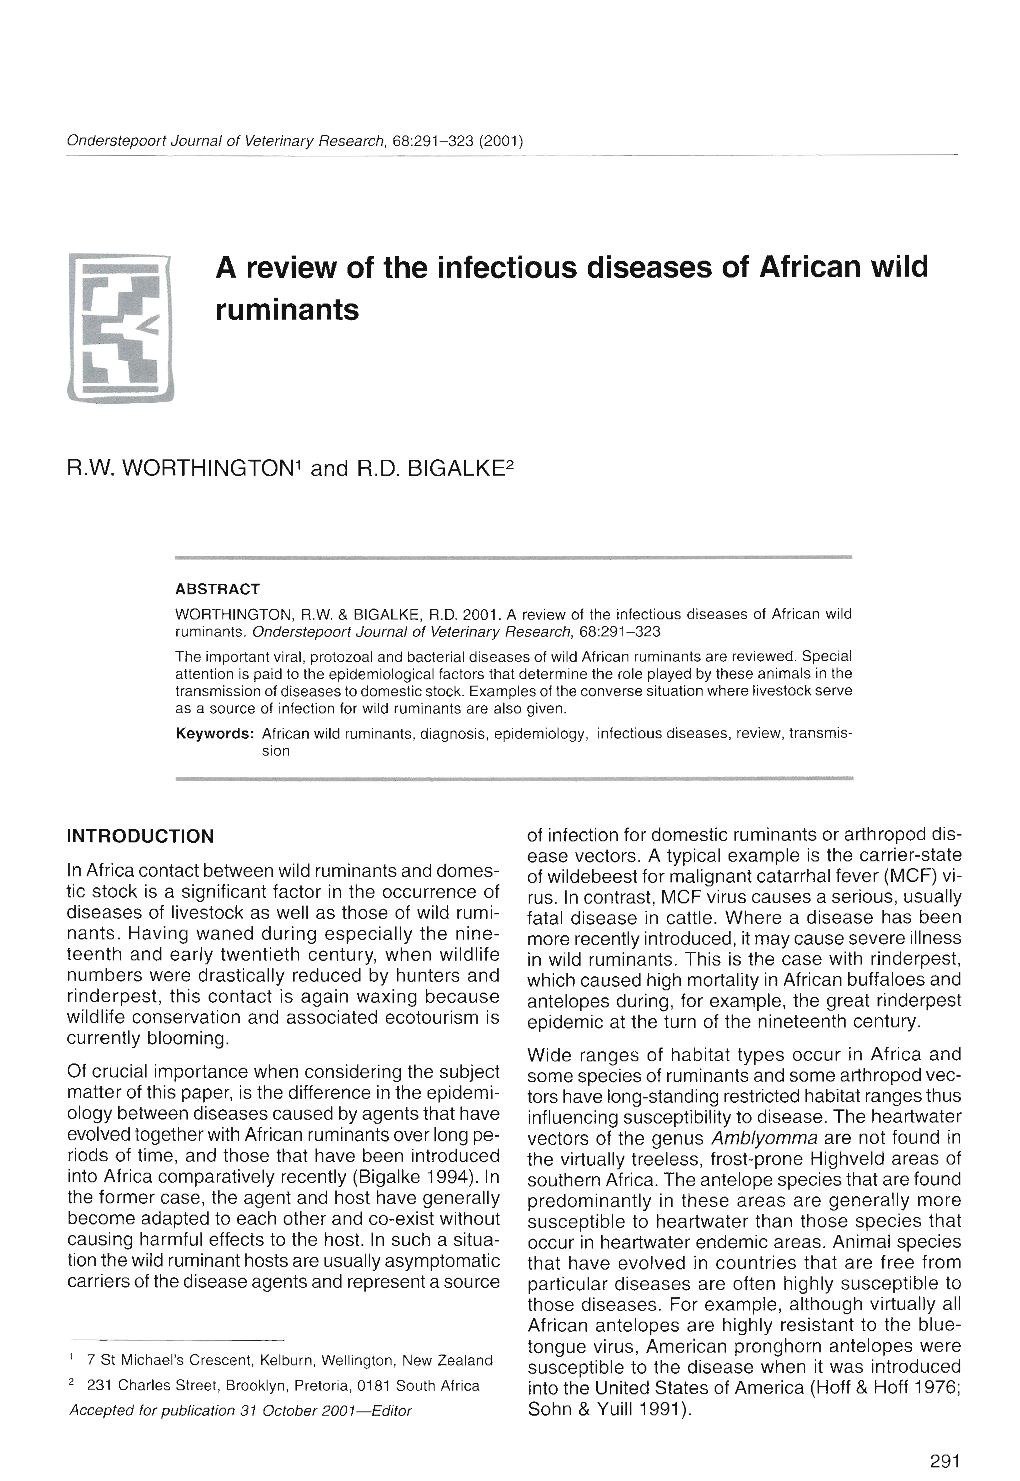 A Review of the Infectious Diseases of African Wild Ruminants